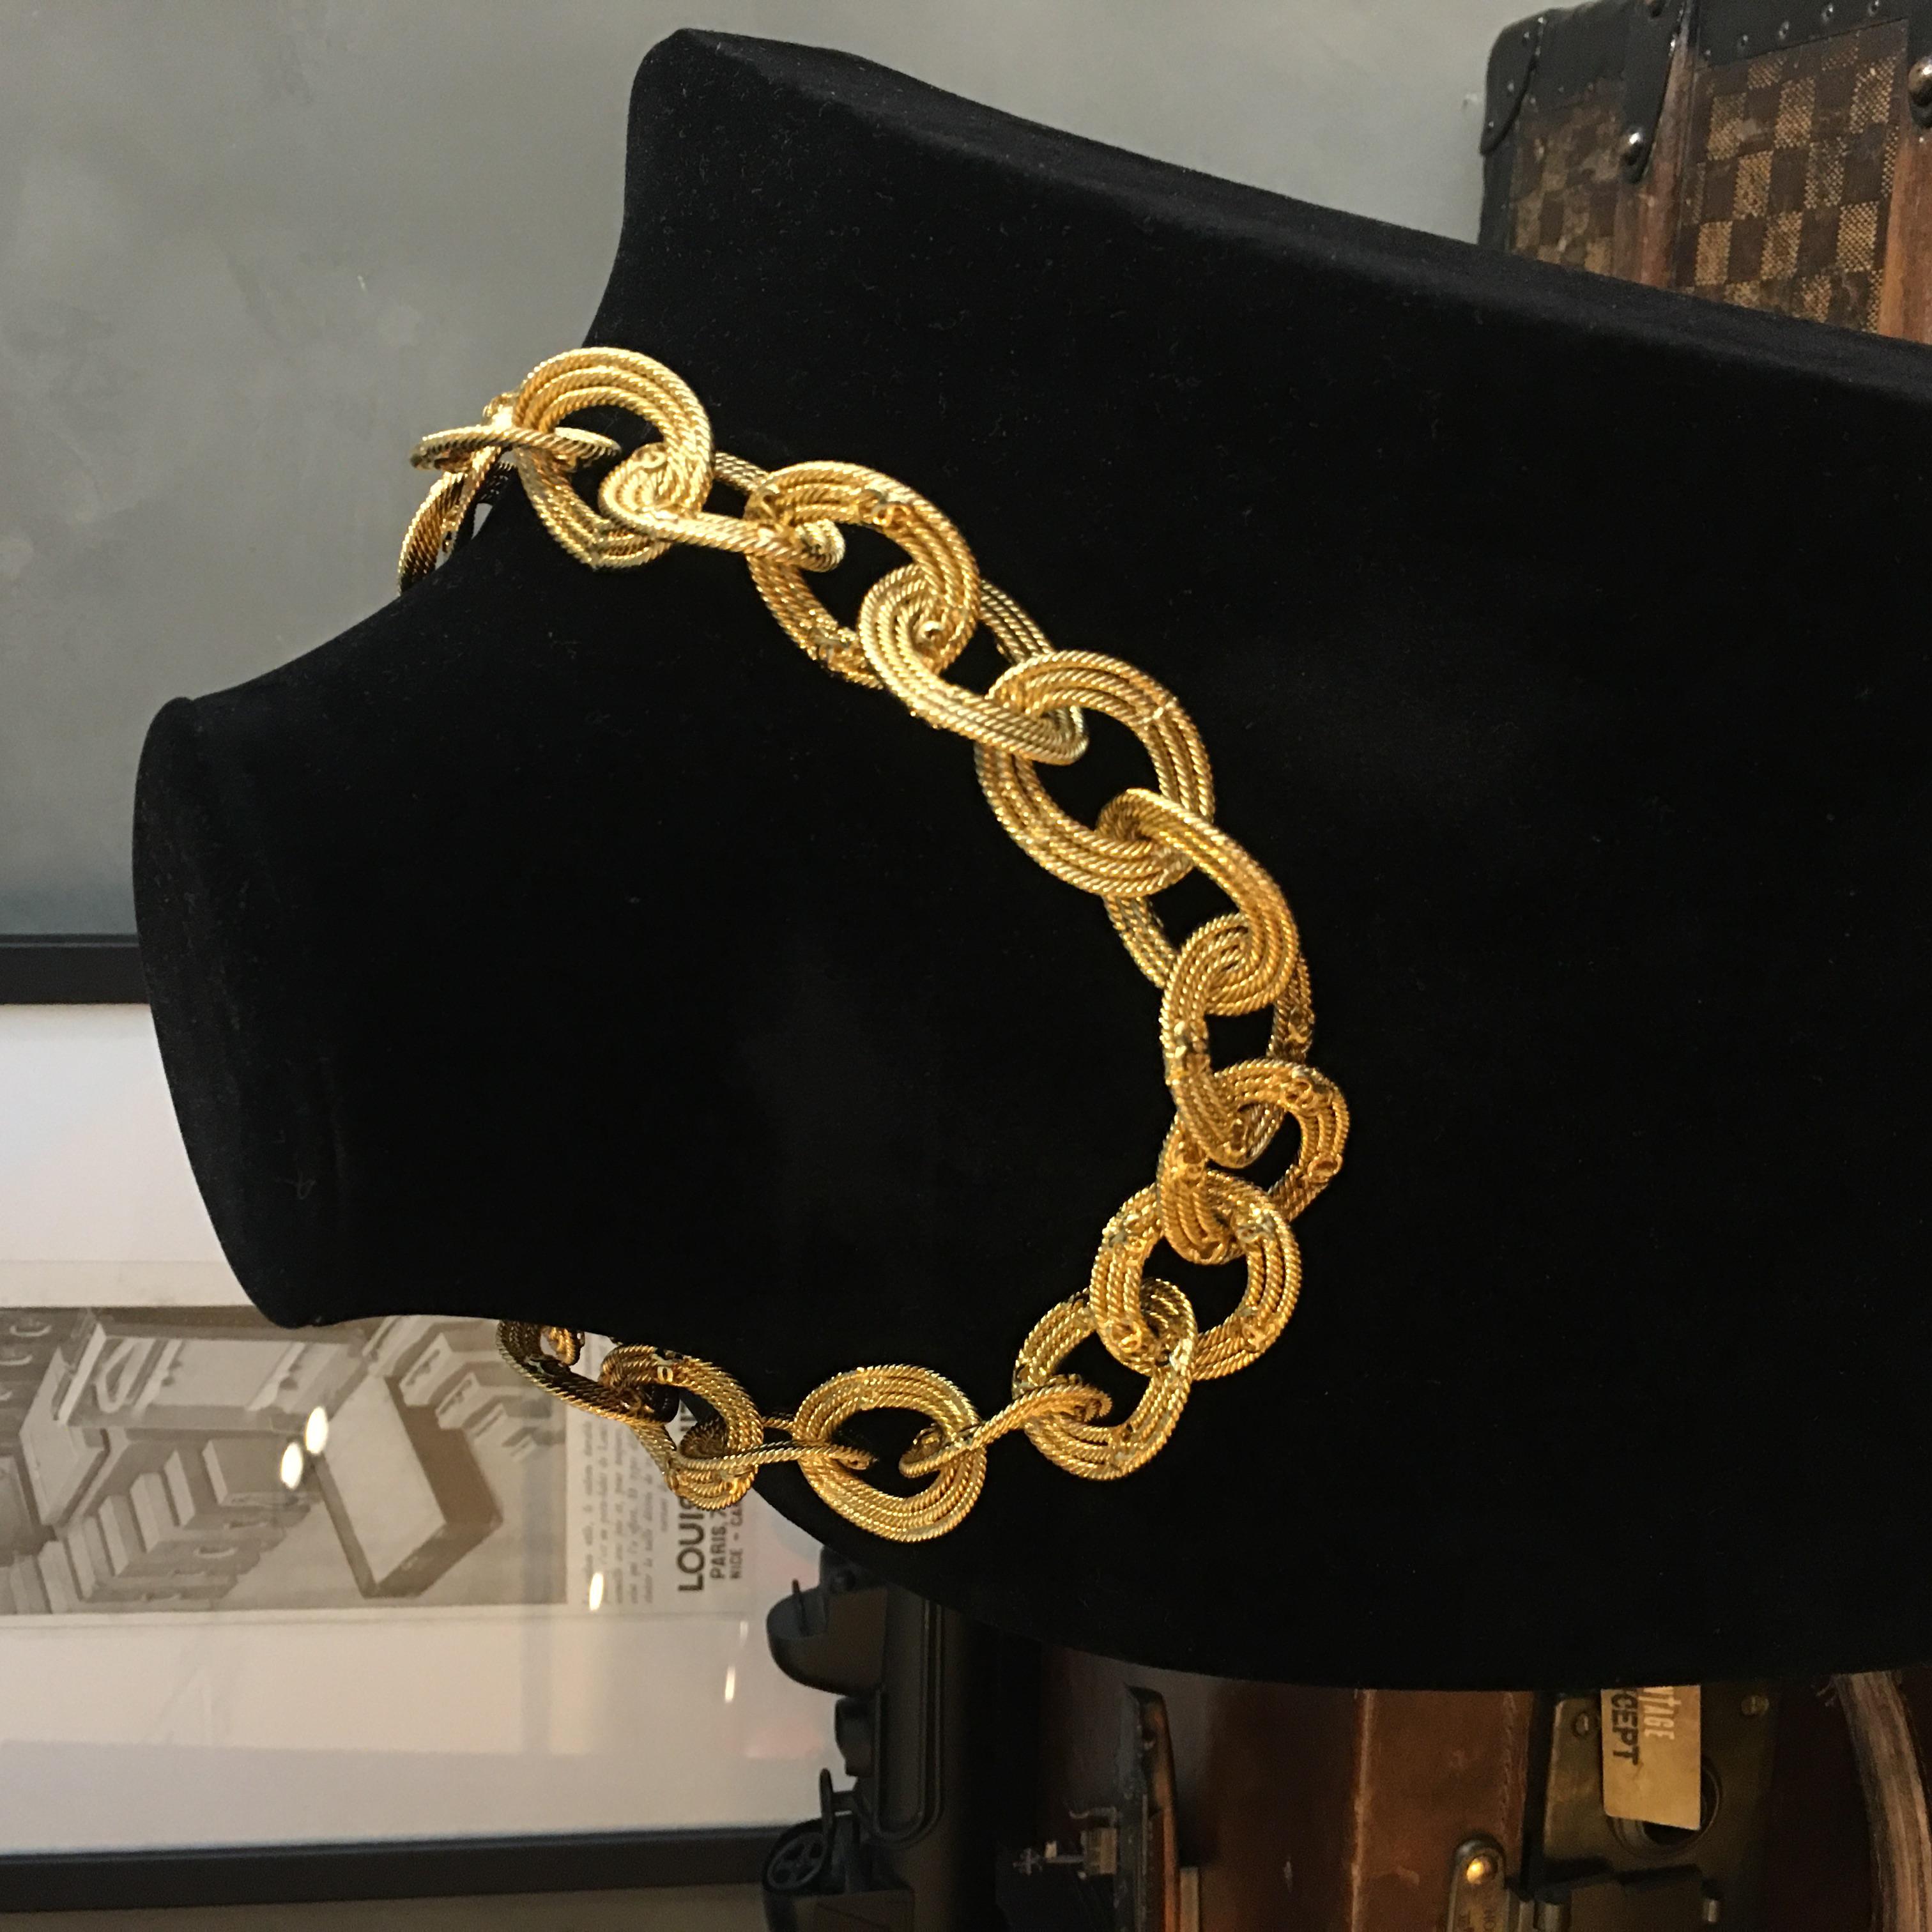 Brand: Chanel
Reference: JW320
Measurement of Necklace: 46.5cm
Material: Gilt Metal
Year: 1989-1991
Made in France
Note: The necklace can be wear fully flat or like the model neck photo

Please Note: the jewelries are guarantee 100% authentic